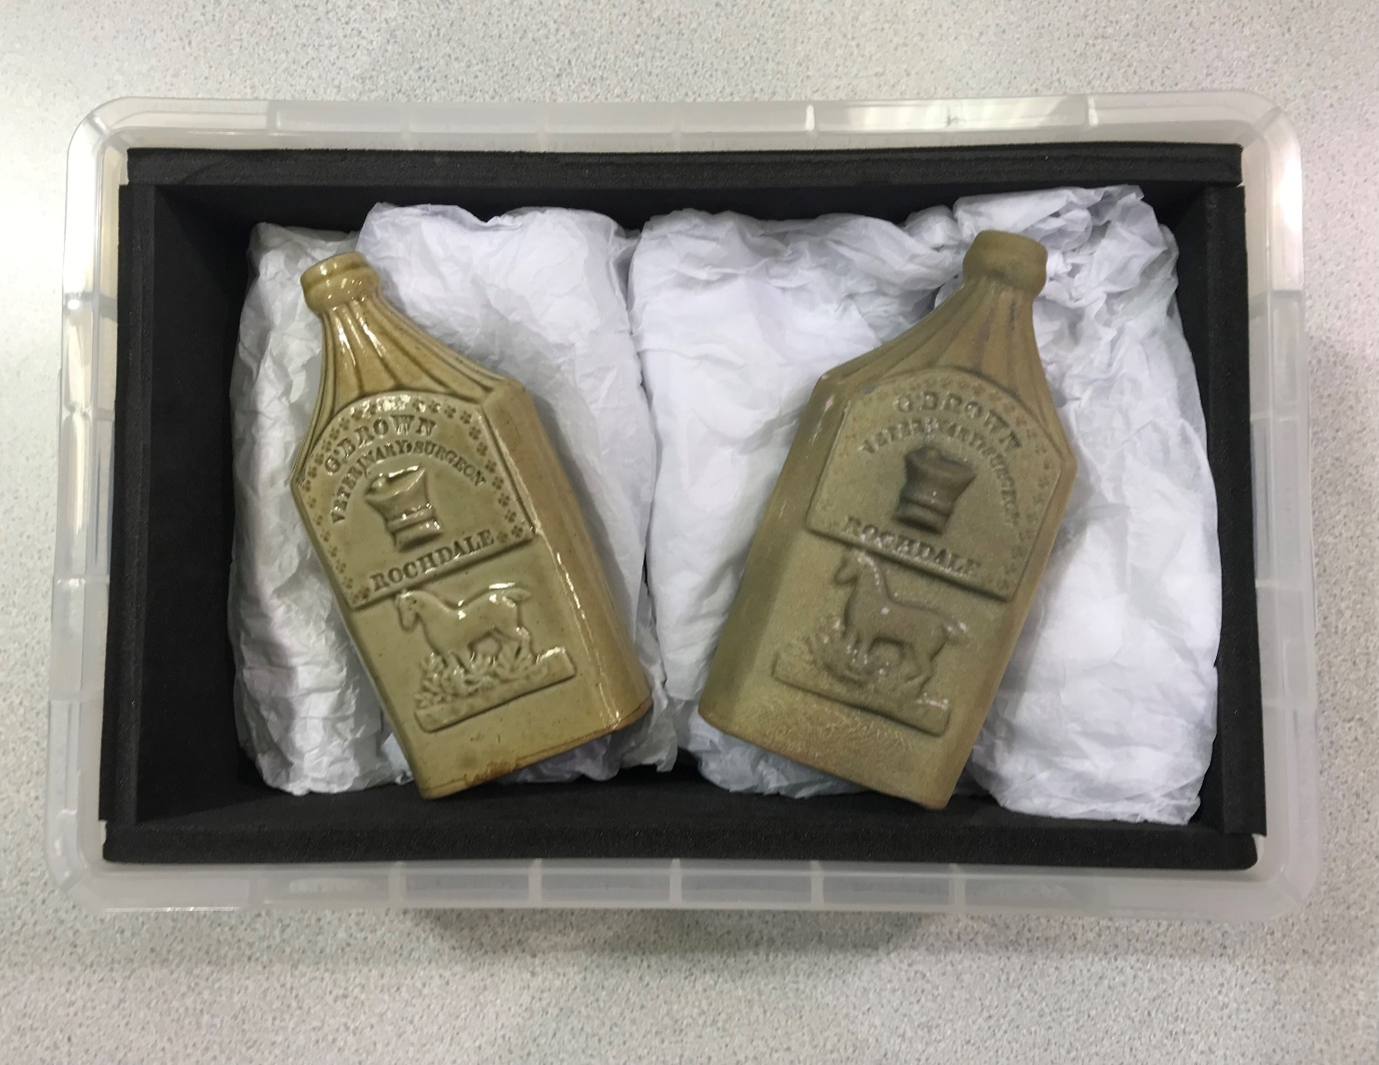 A Stoneware medicine bottle, used by a Veterinary Surgeon in Rochdale, dating from 1850-1860 (left) and the 3D printed version (right)